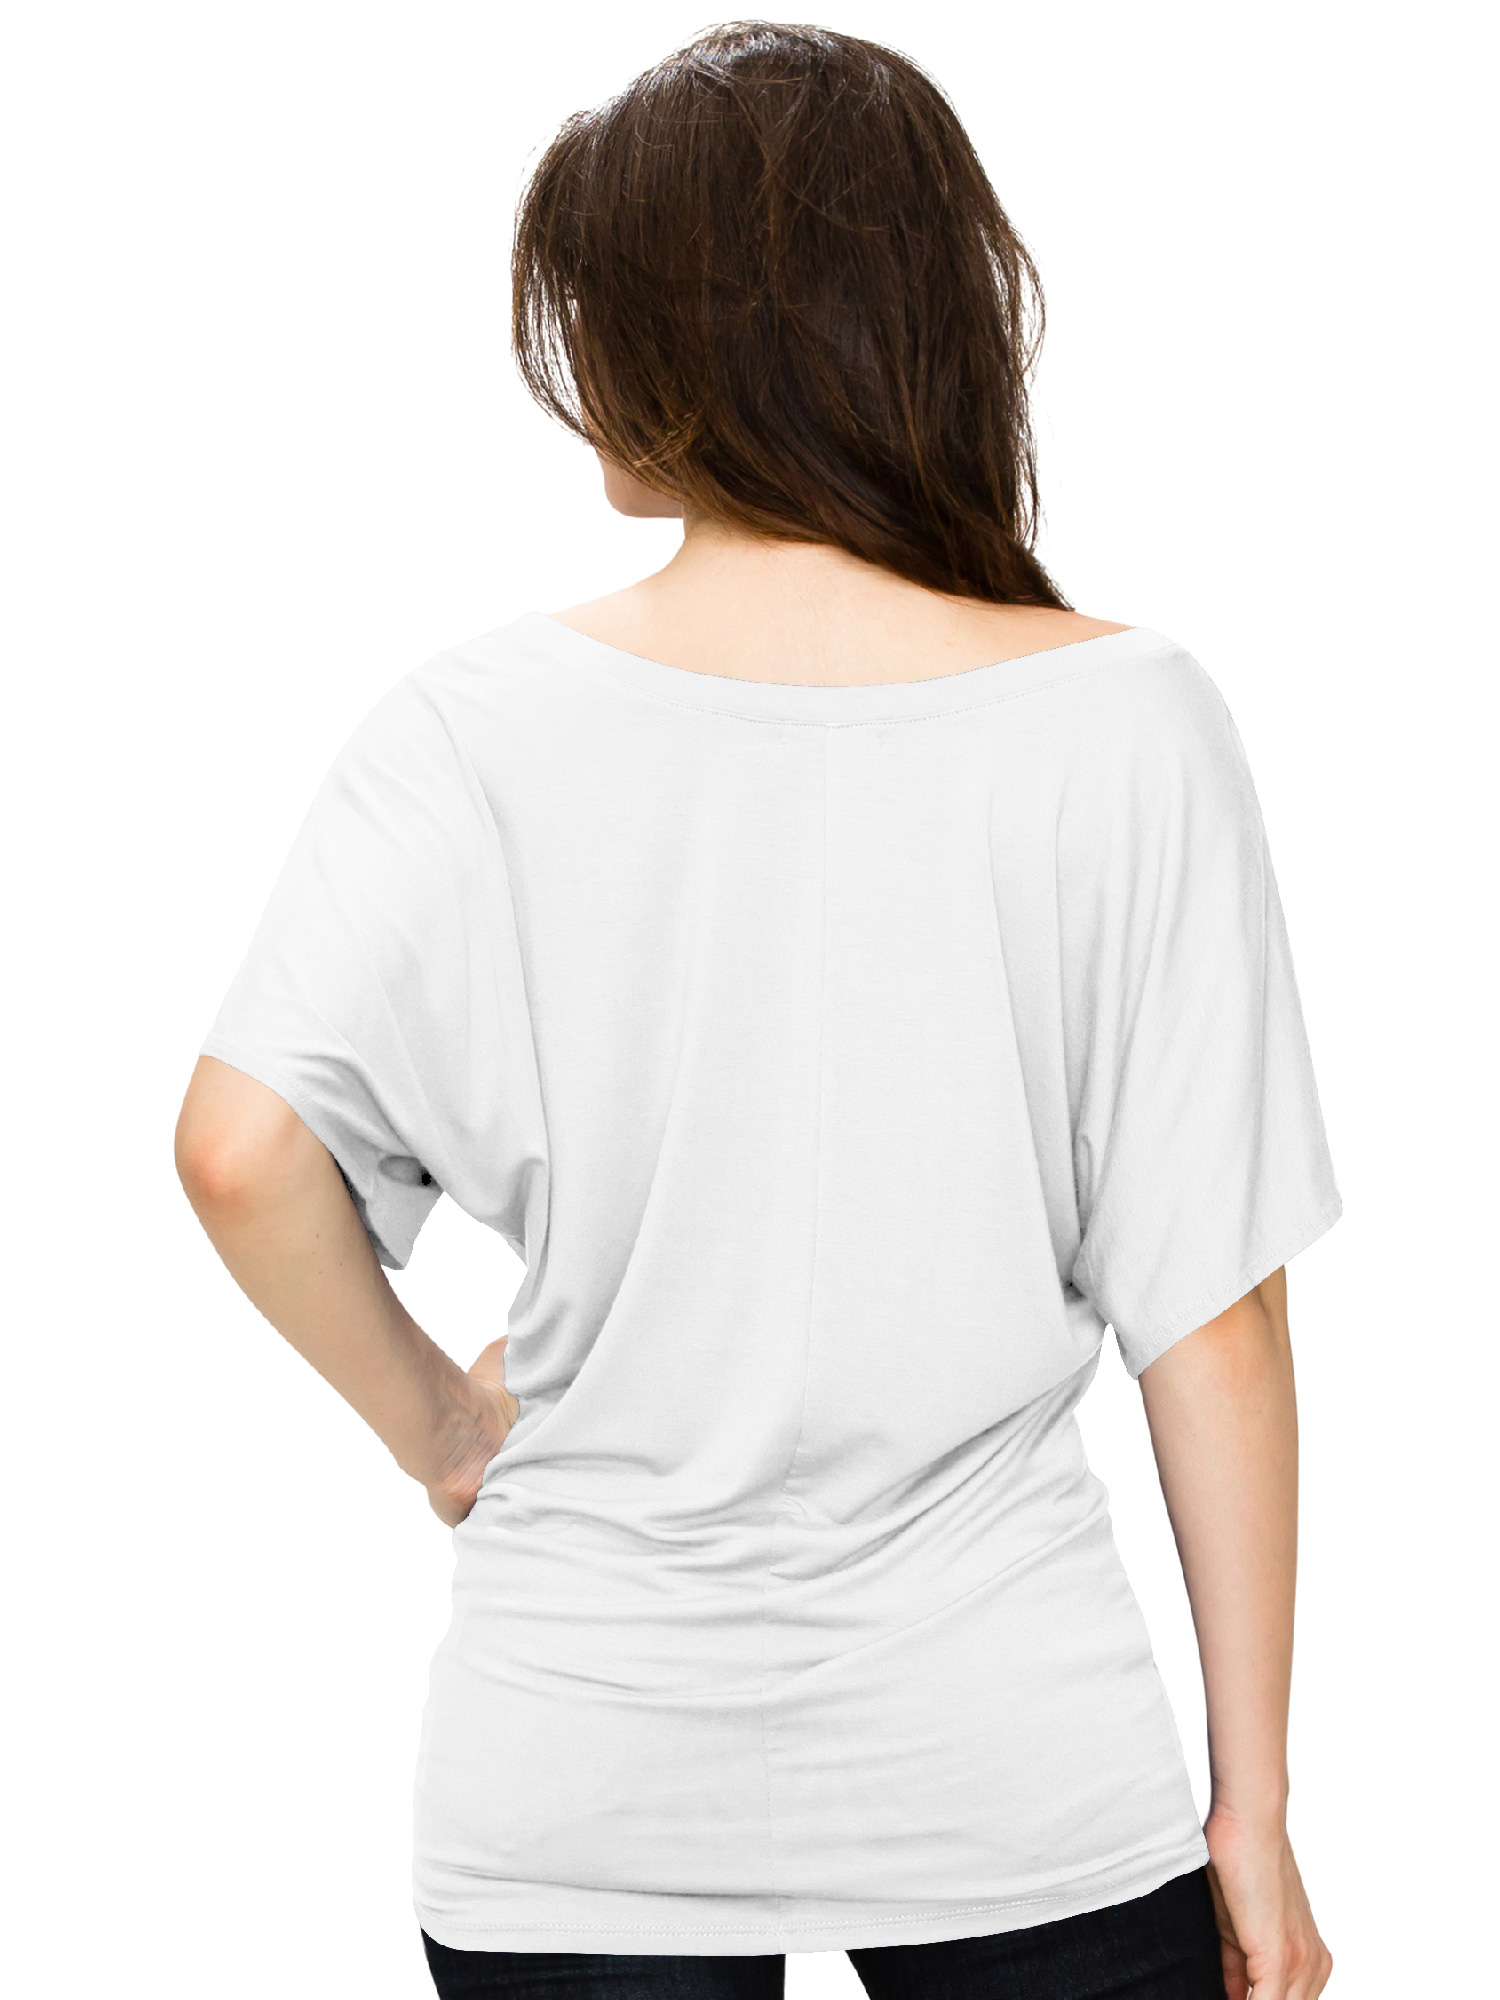 Made by Johnny Women's Boat Neck Short Sleeve Dolman Drape Top S WHITE - image 5 of 6